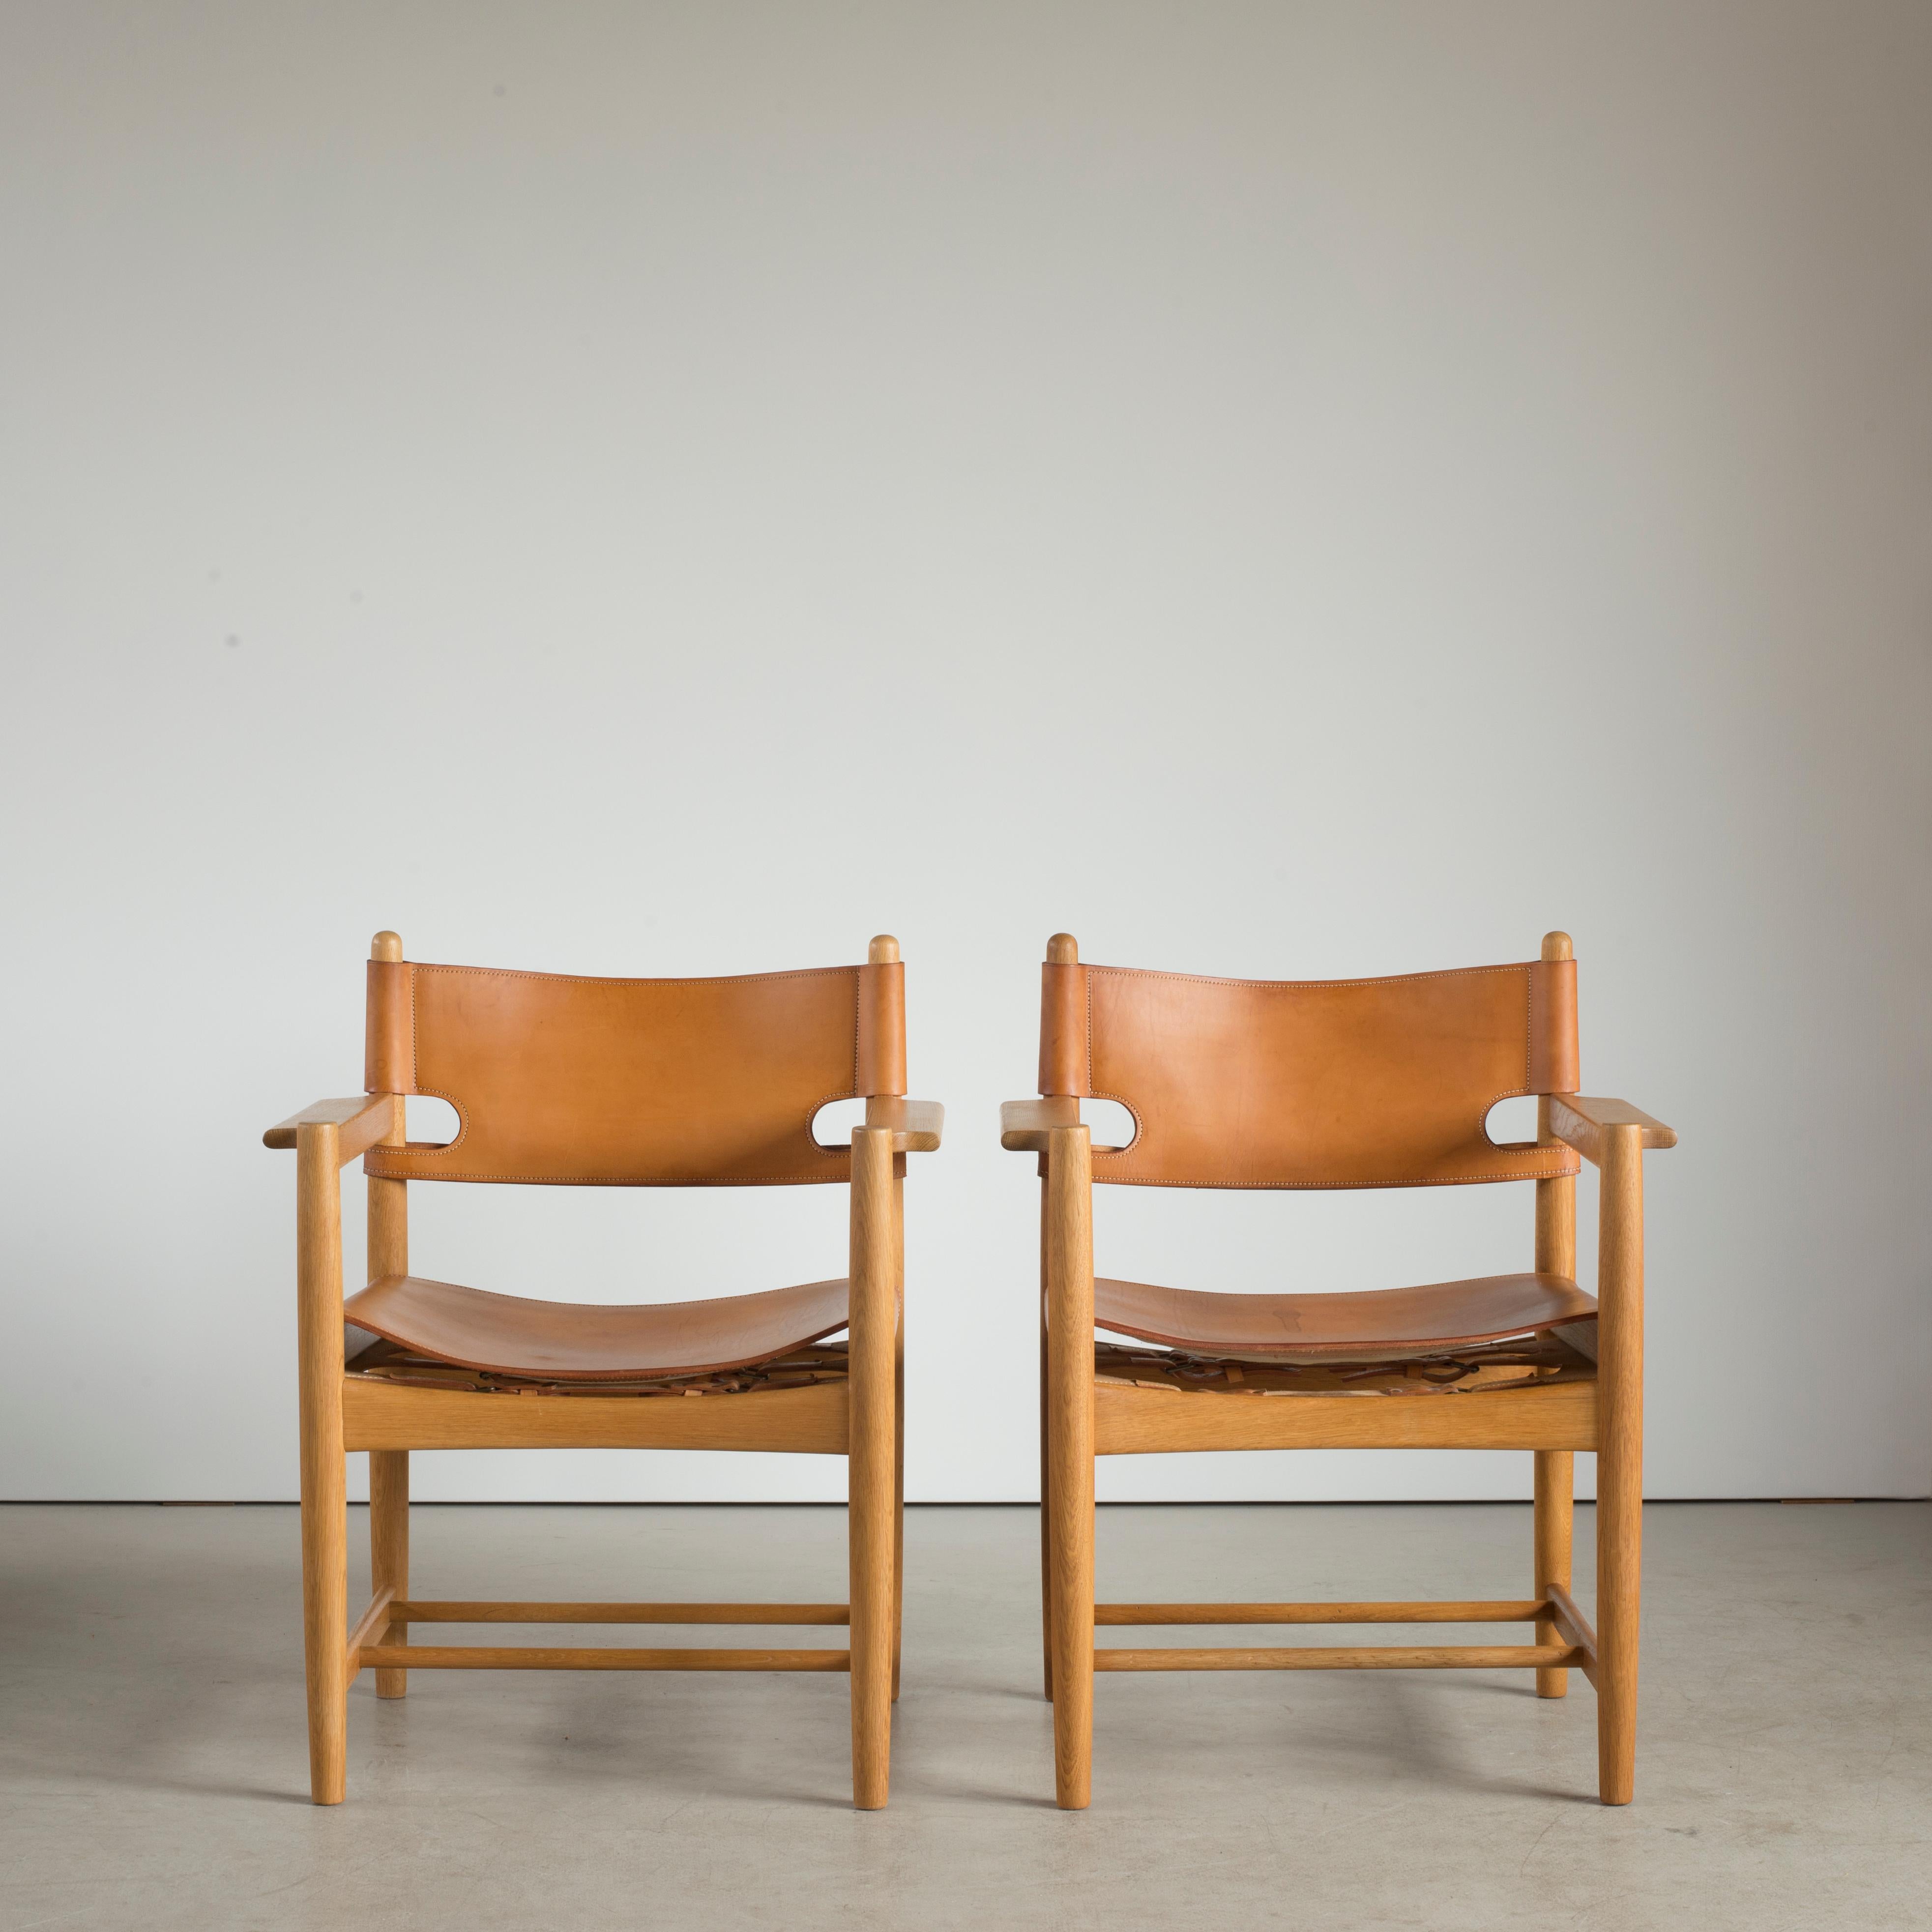 Børge Mogensen two armchairs of oak and natural leather. Executed by Fredericia Furniture.